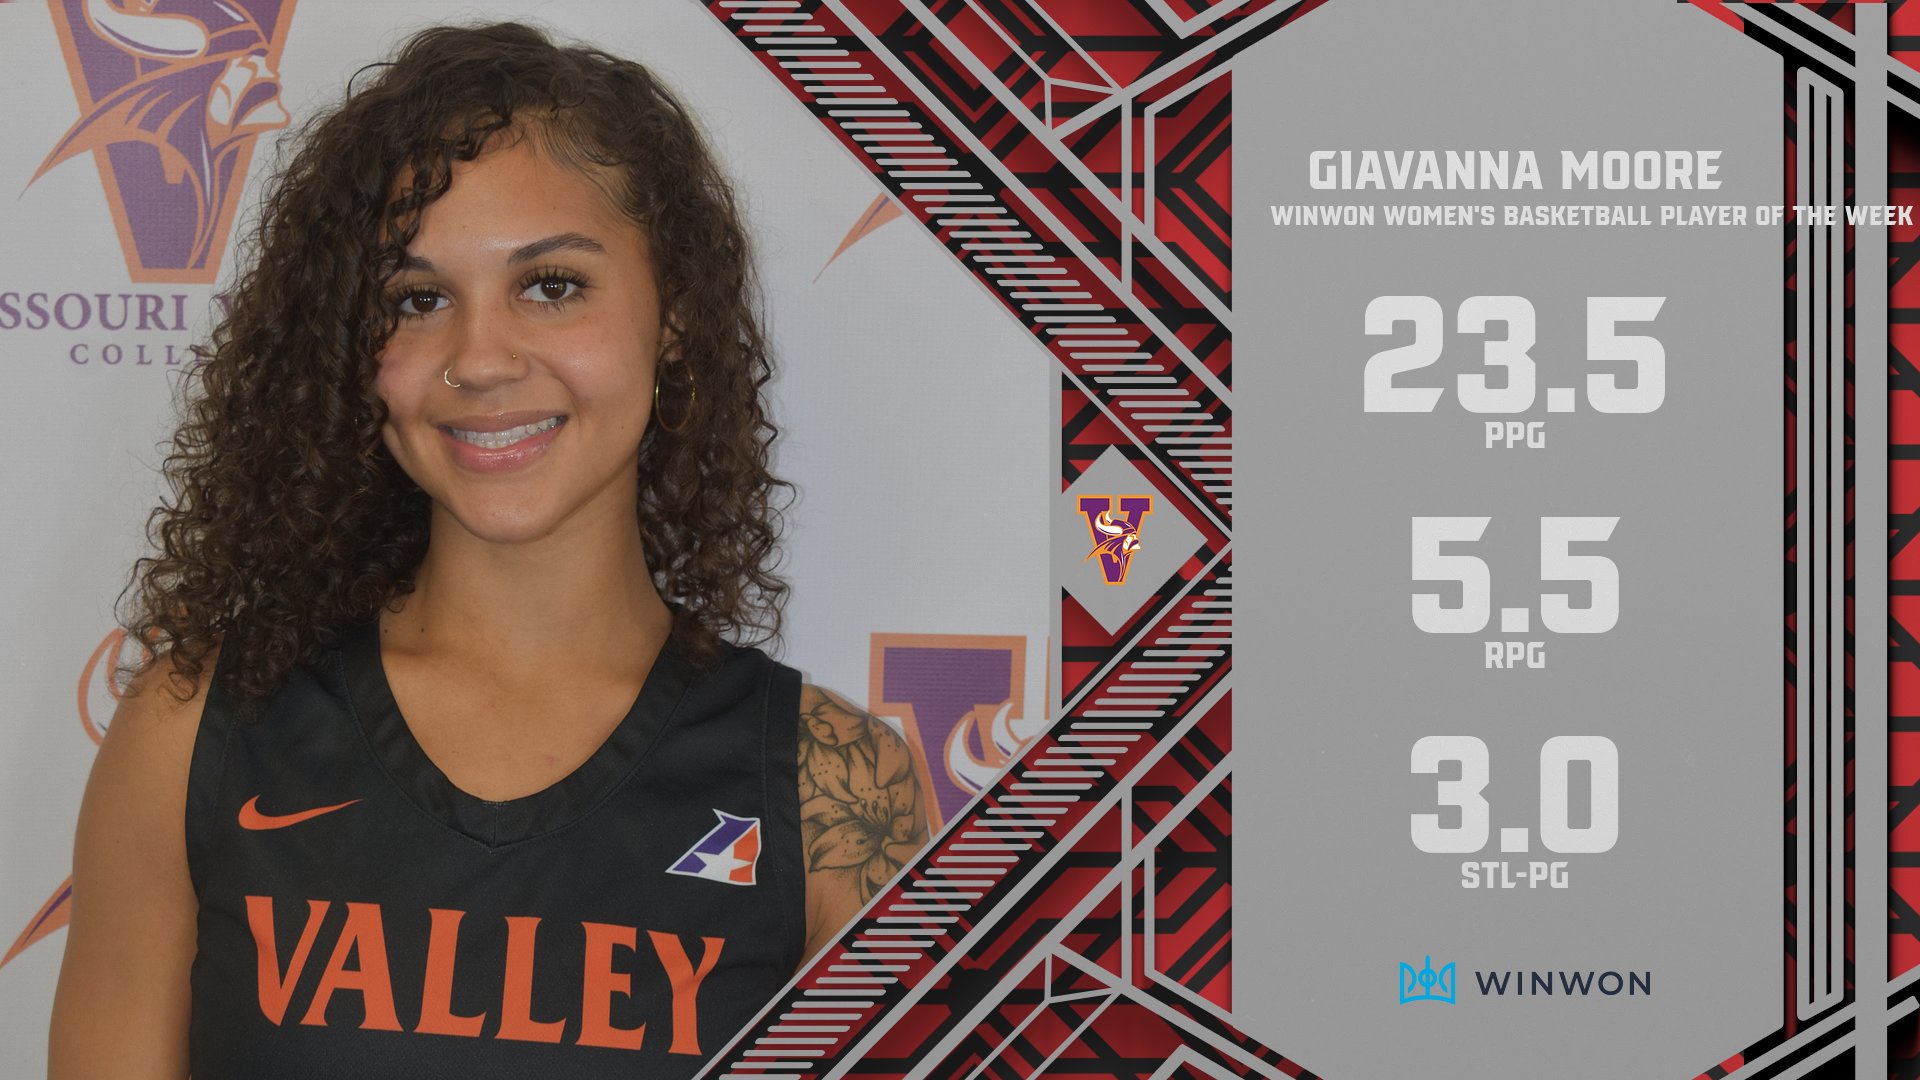 Giavanna Moore of Missouri Valley Selected WinWon Women’s Basketball Player of the Week Honors